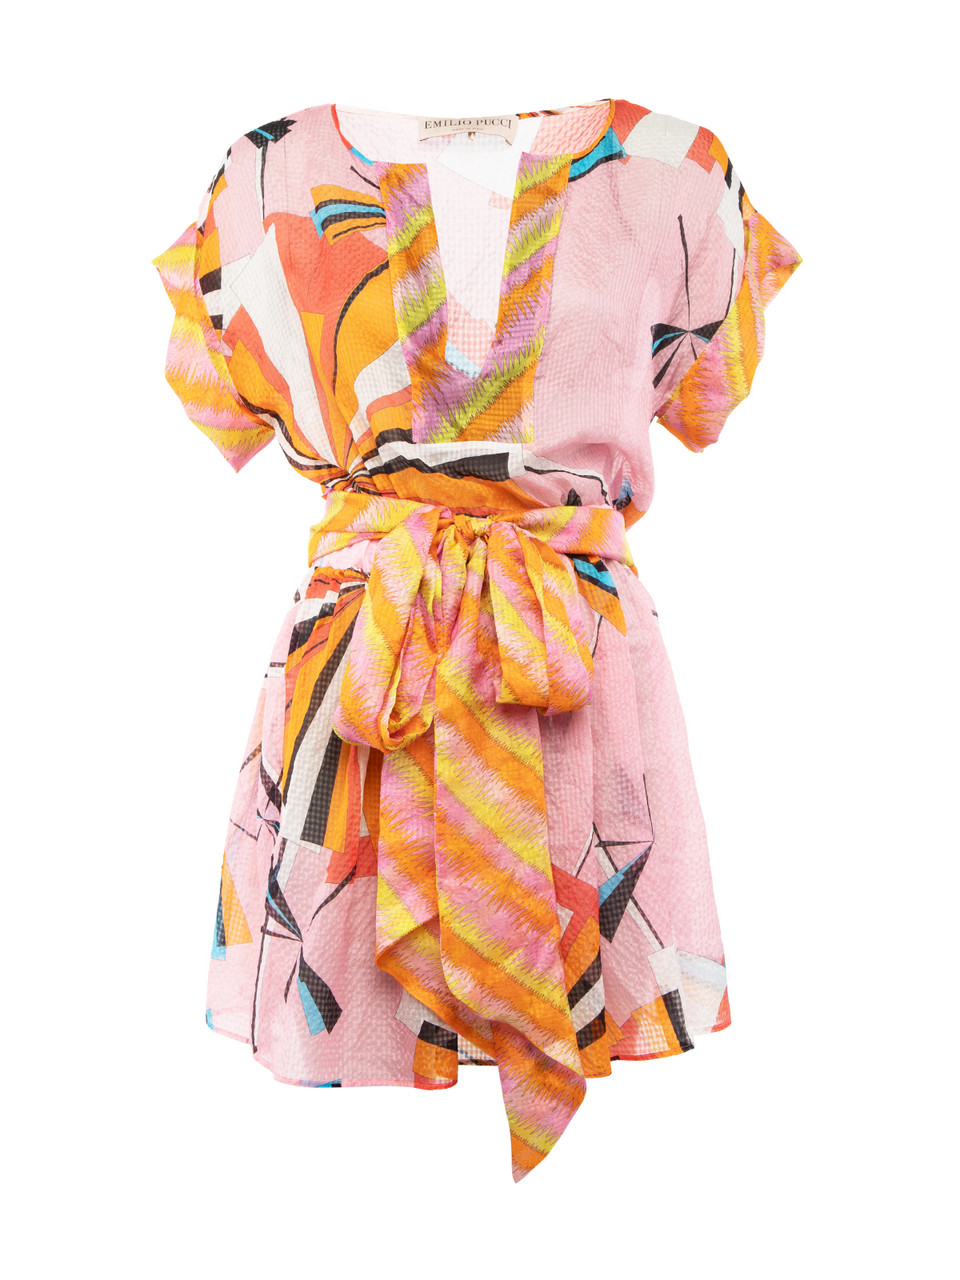 Emilio Pucci Printed Sheer Dress with Belt Attachment